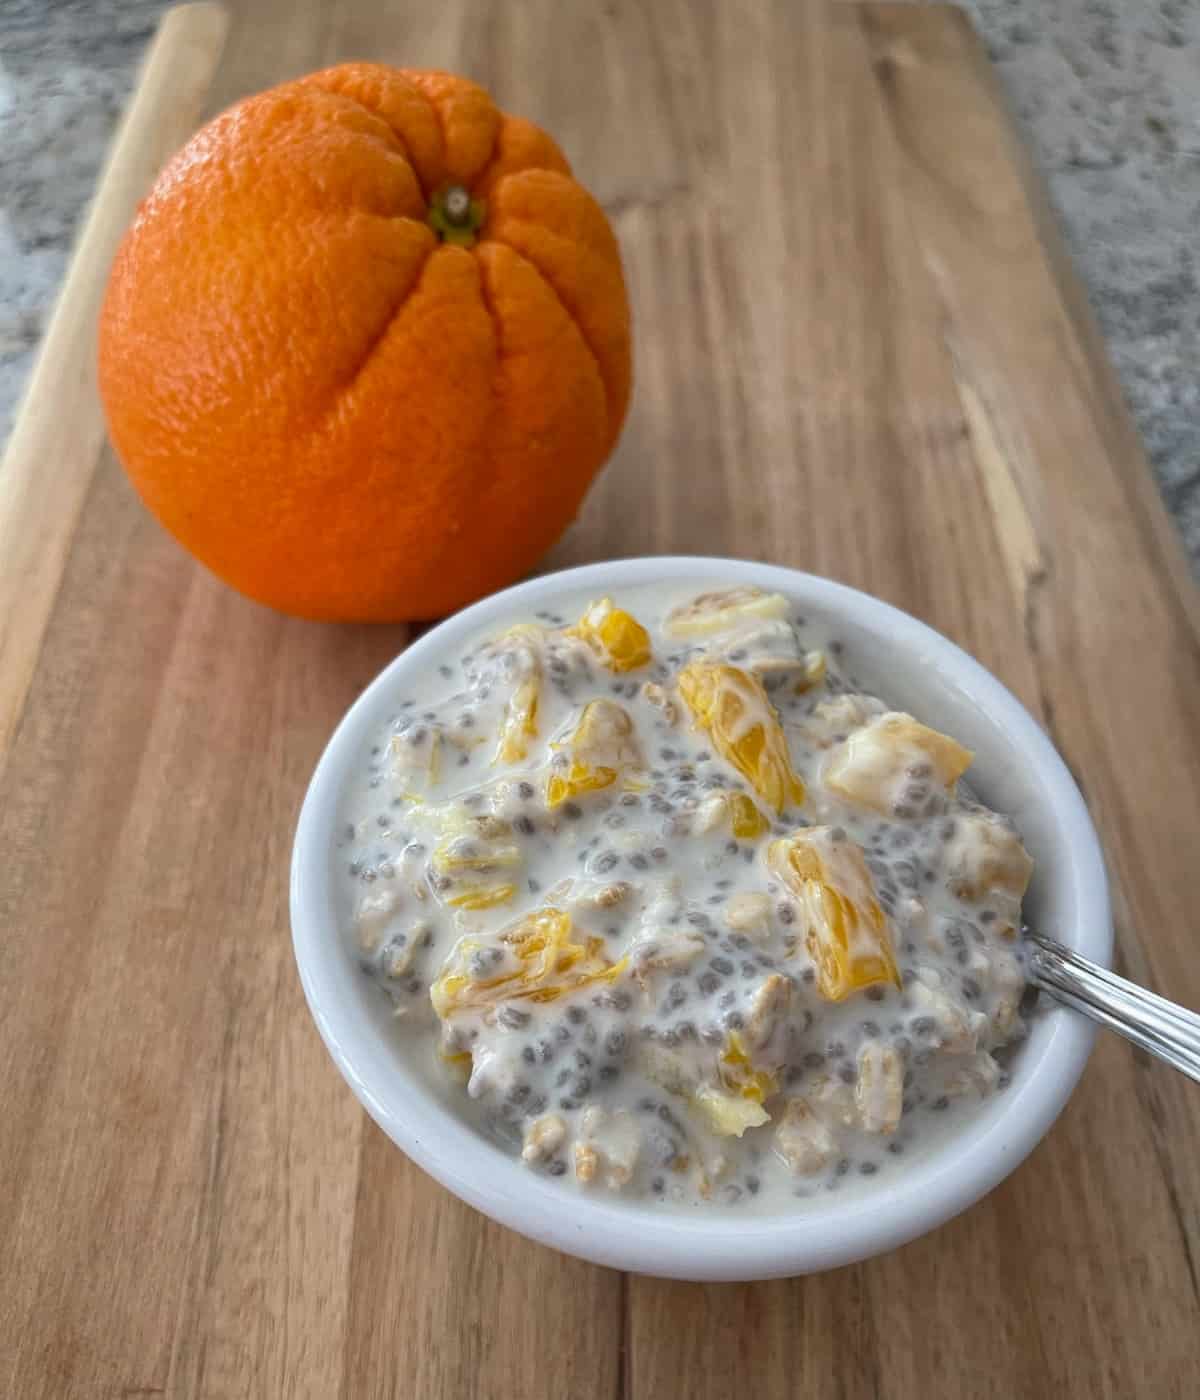 Overnight chia orange oats in small white bowl with spoon and fresh whole orange in the background on wood cutting board.